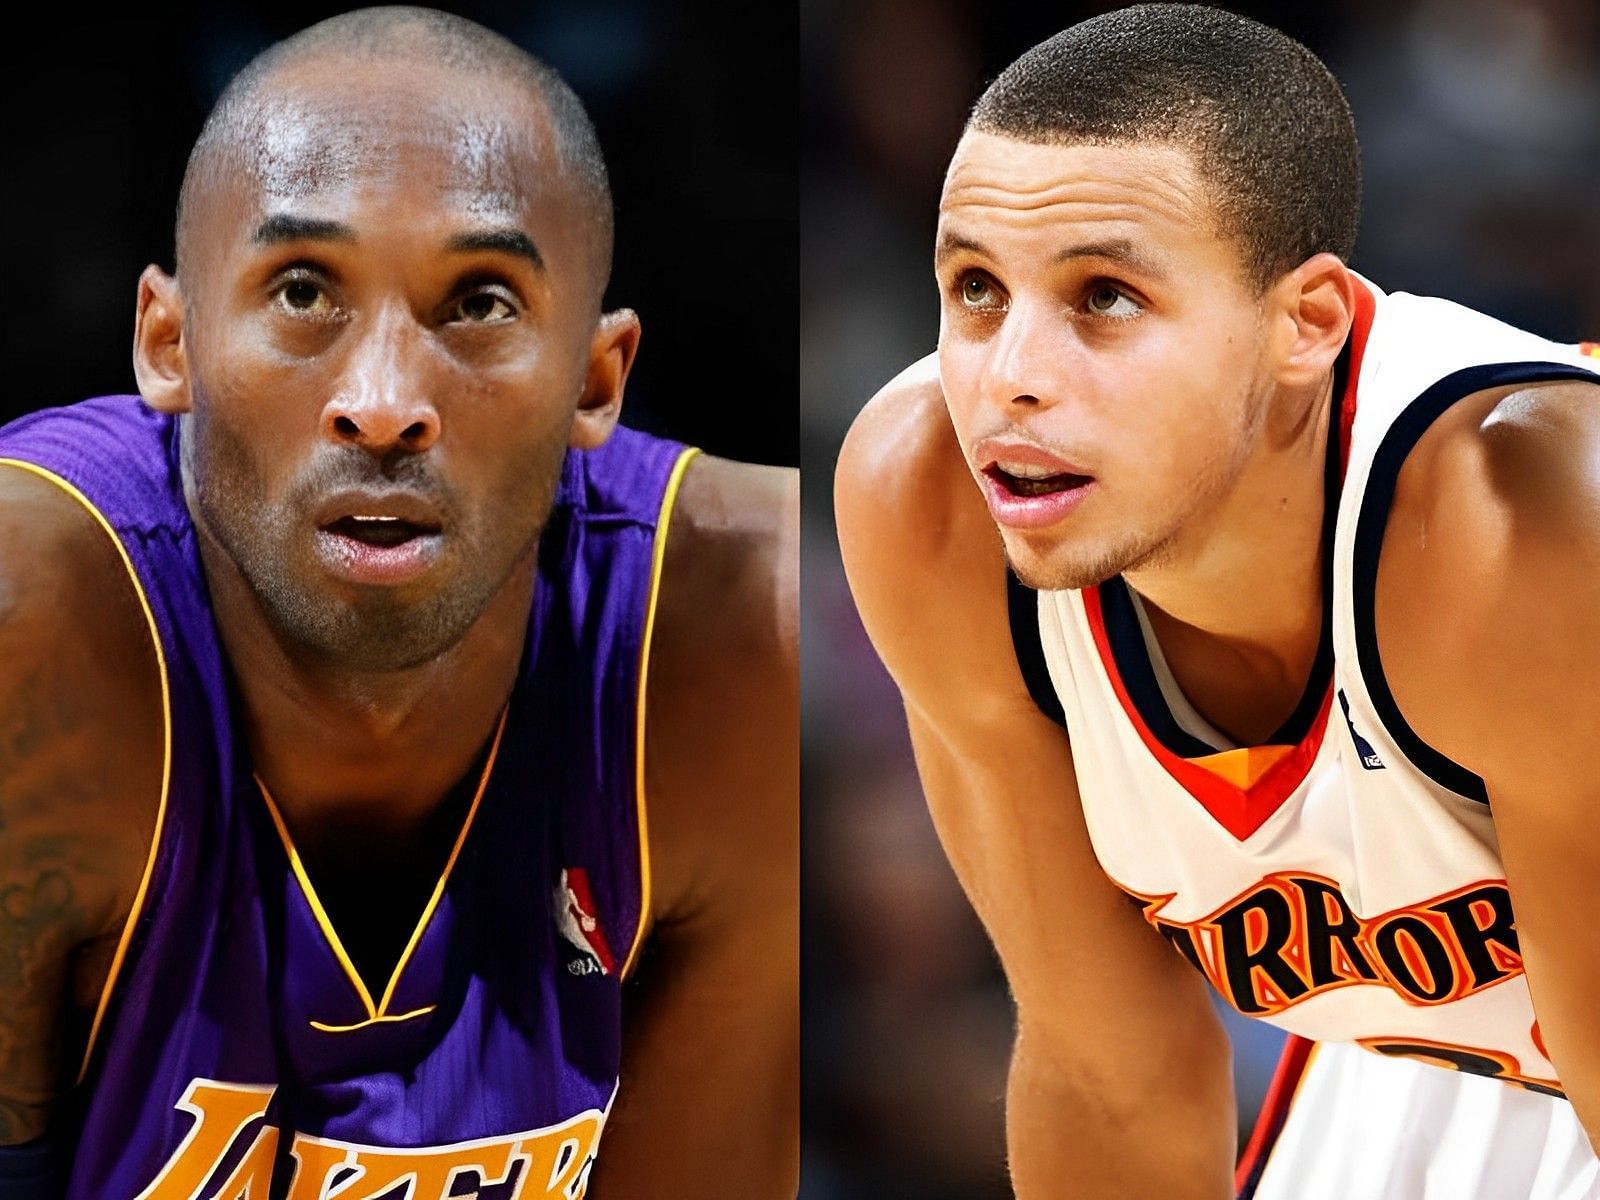 LA Lakers legend Kobe Bryant and Golden State Warriors superstar point guard Steph Curry